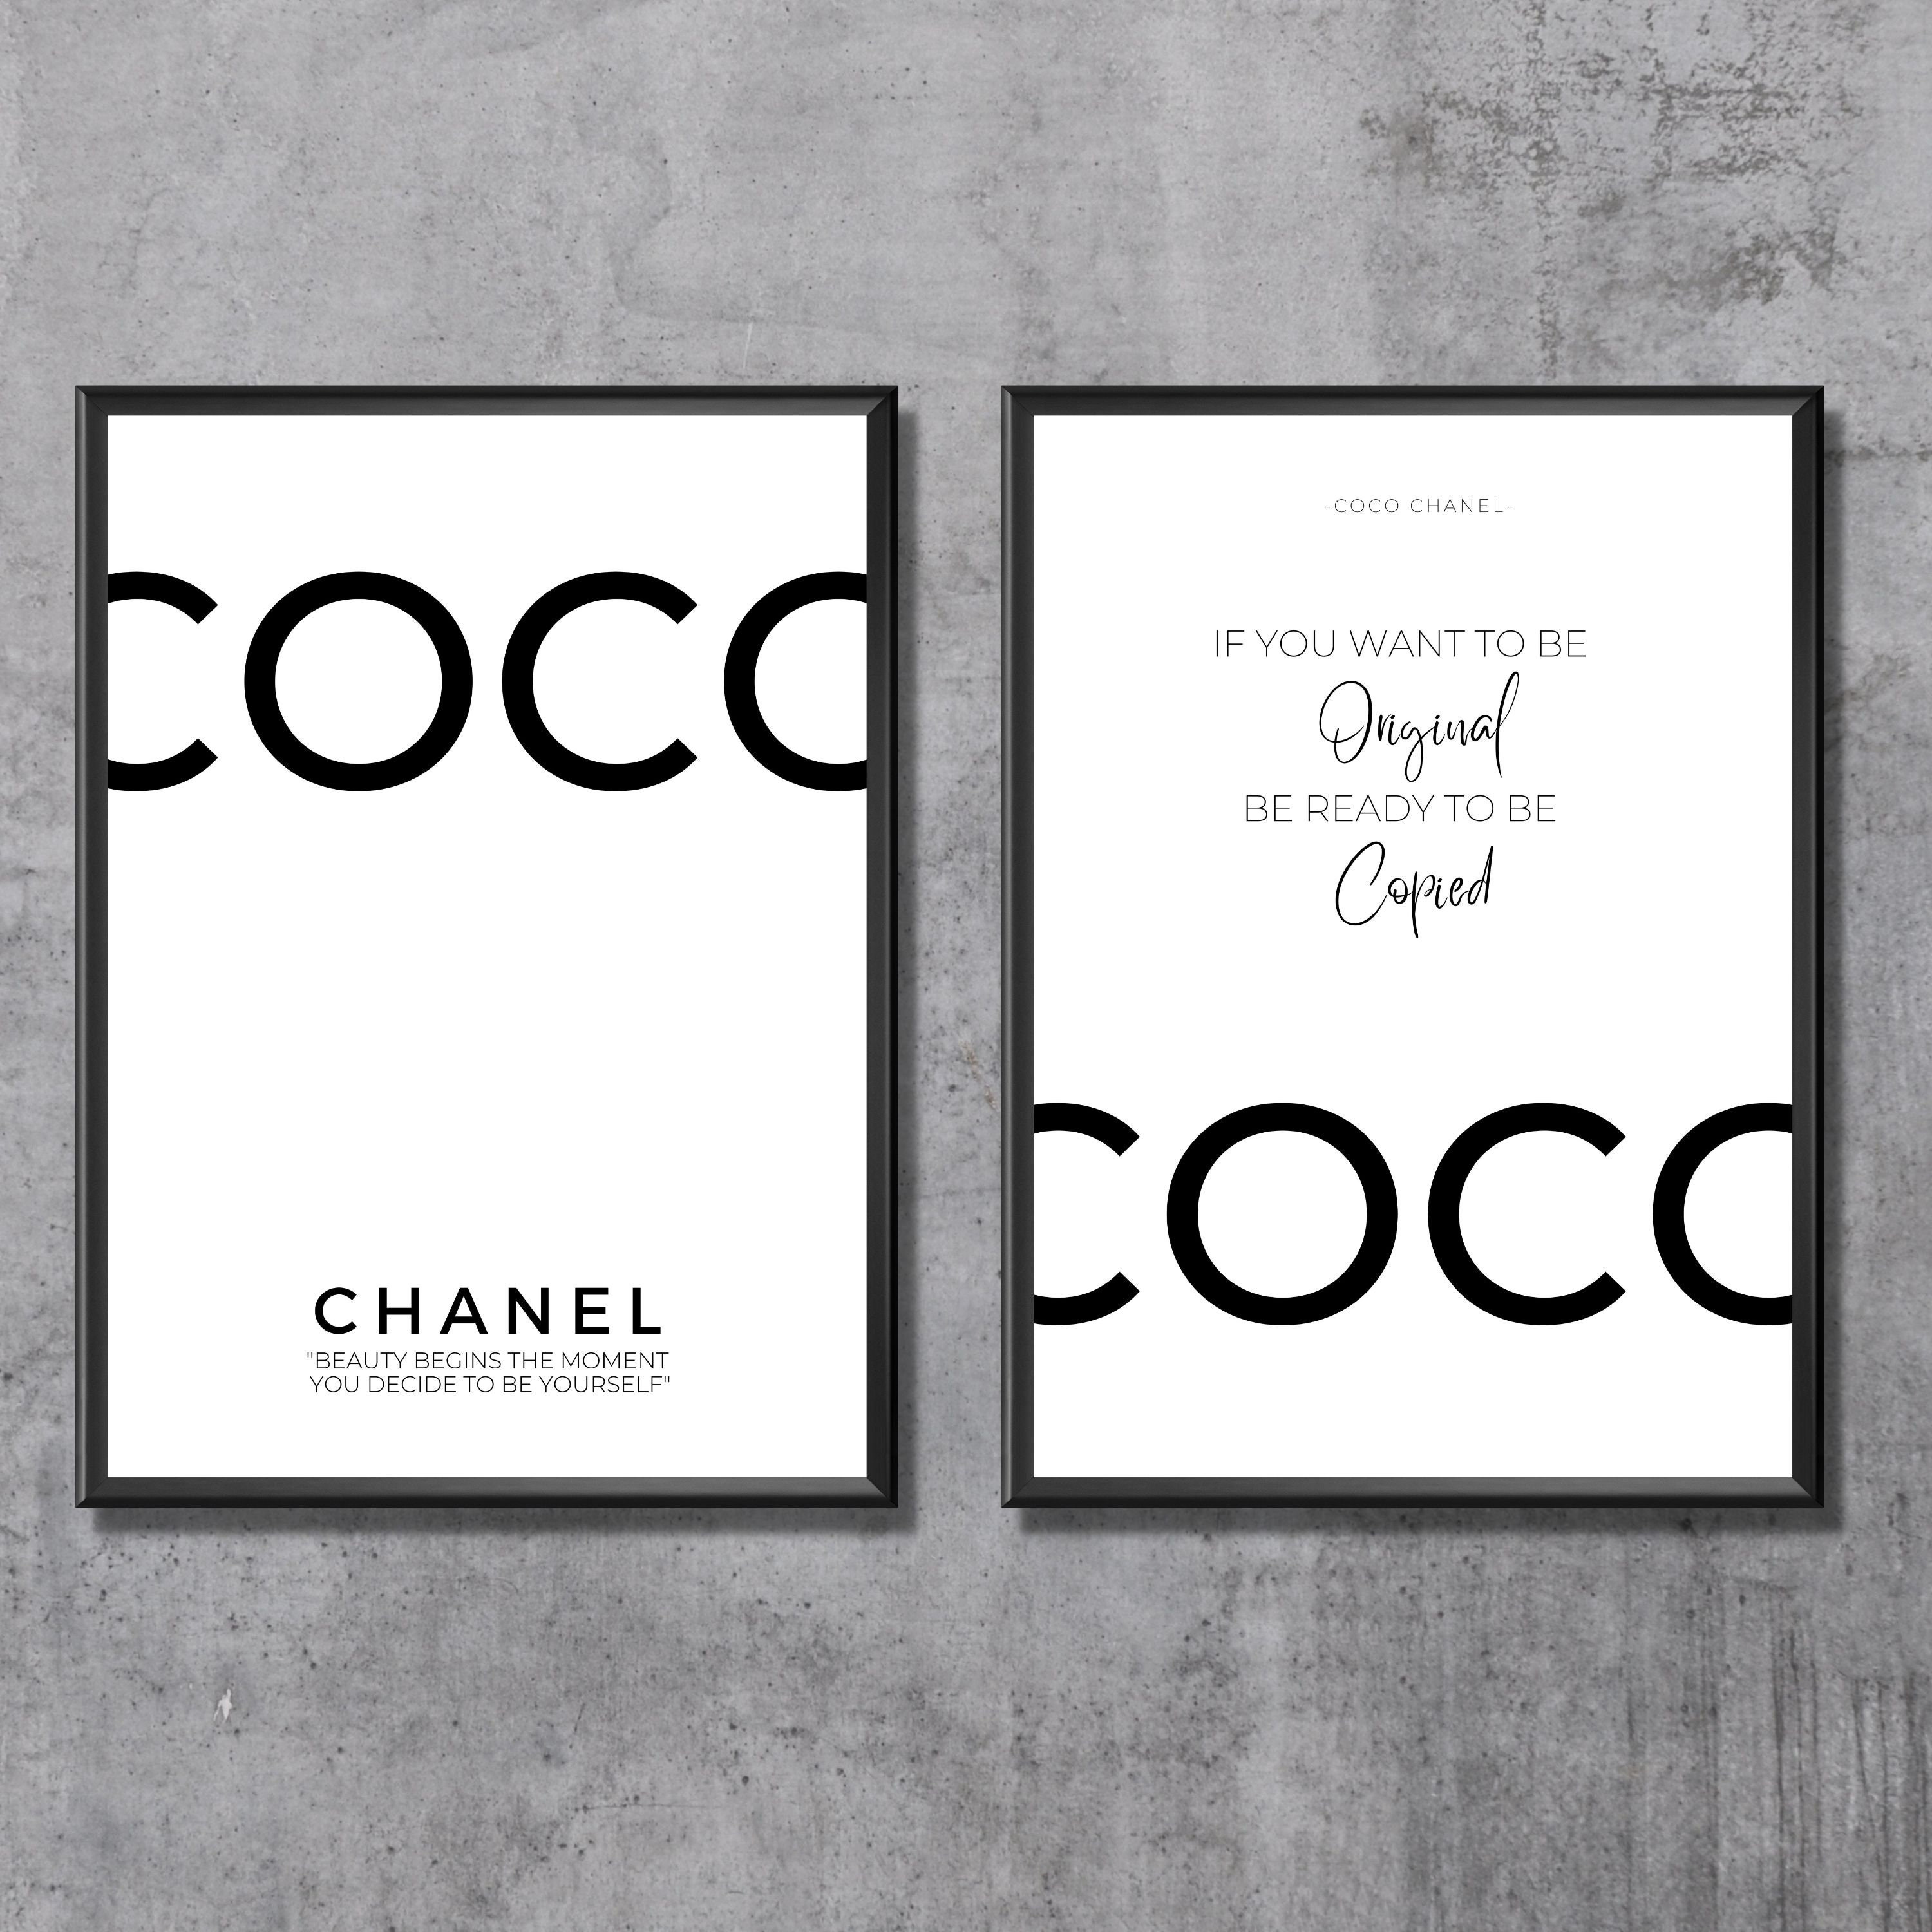 Affiche Coco Chanel - Poster mode chanel